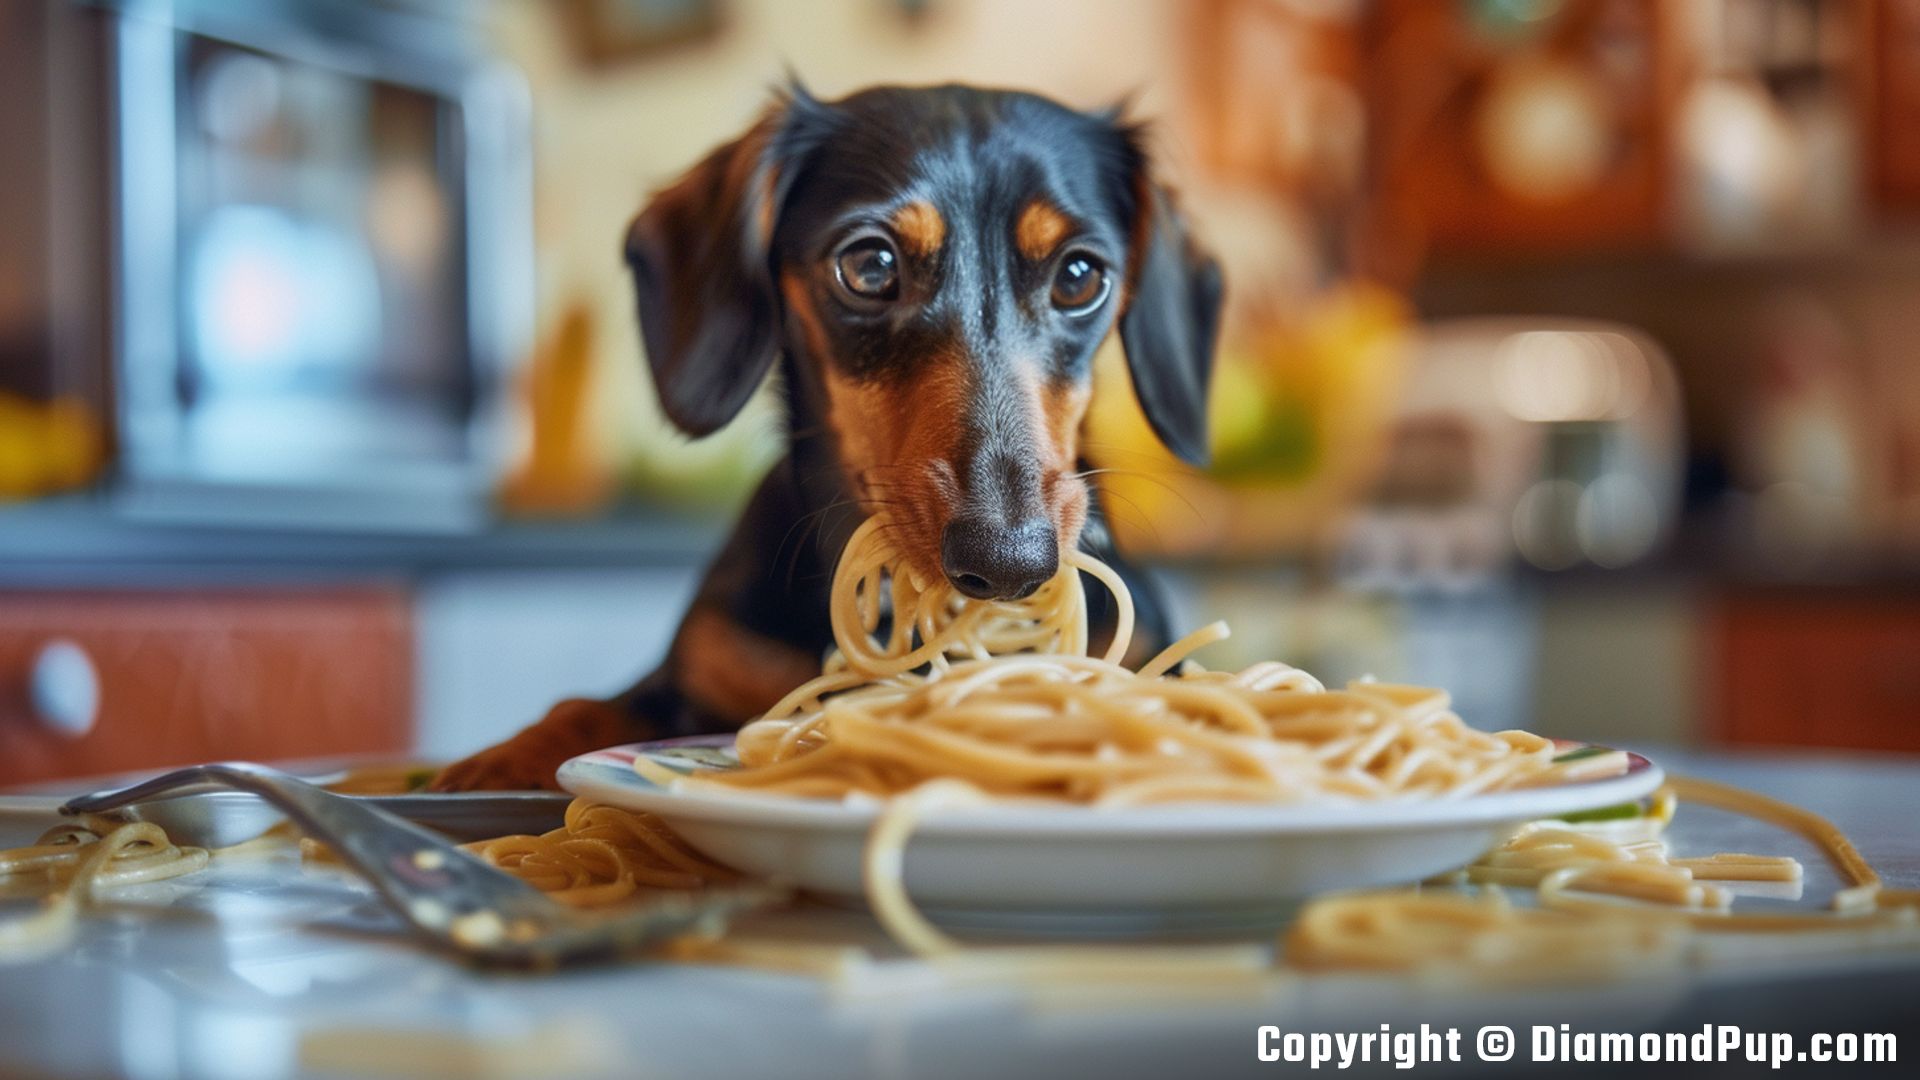 Photo of an Adorable Dachshund Snacking on Pasta